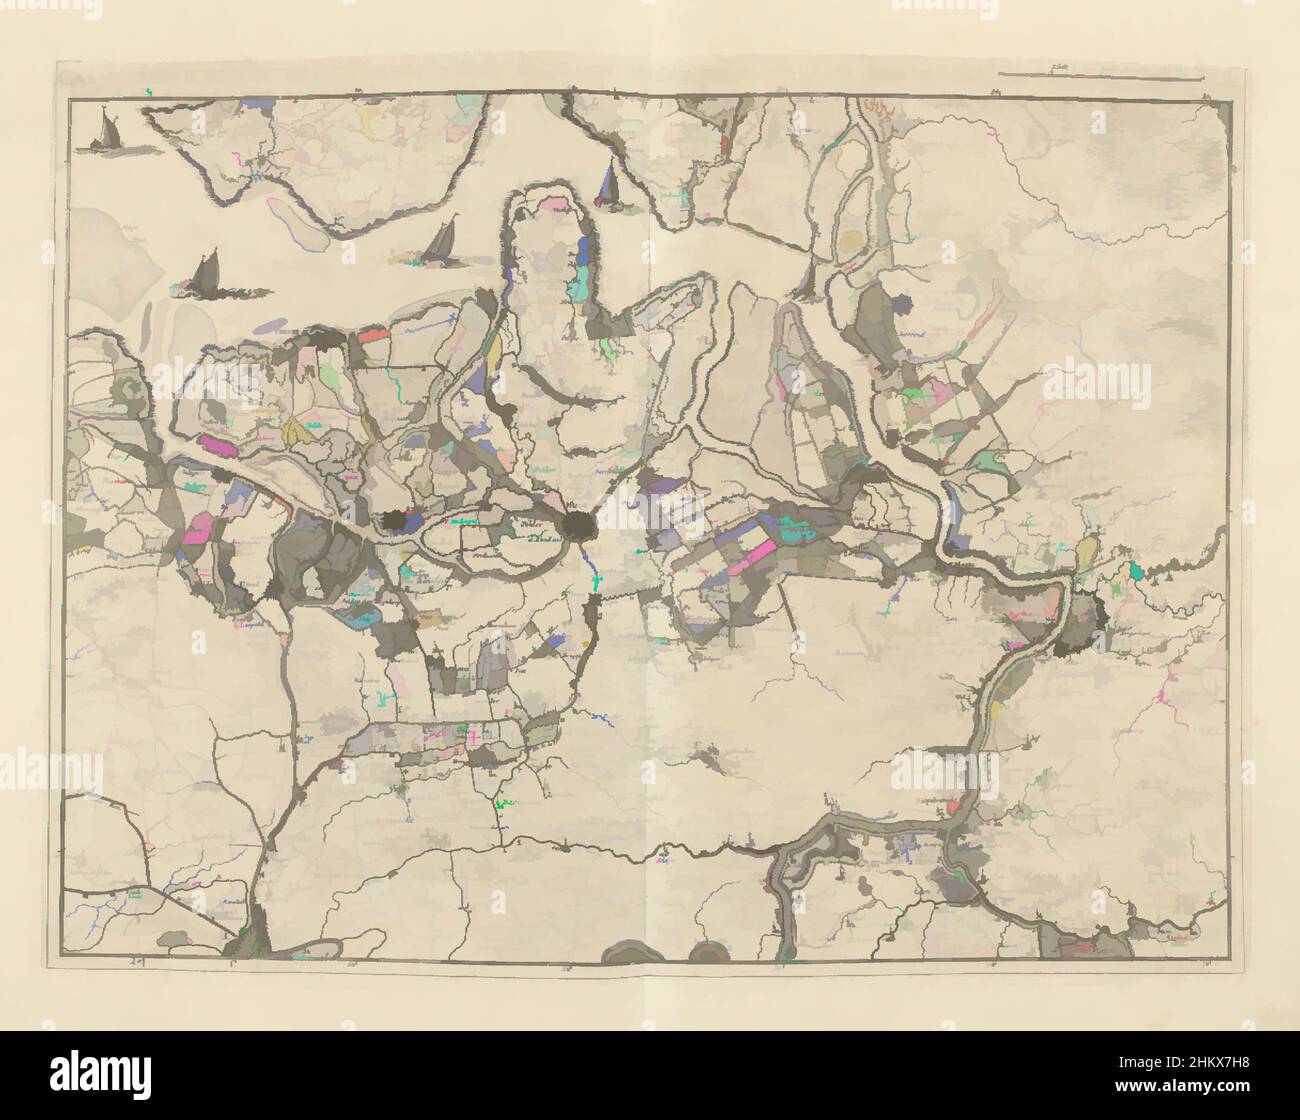 Building a map inspired by Red Dead Redemption 2